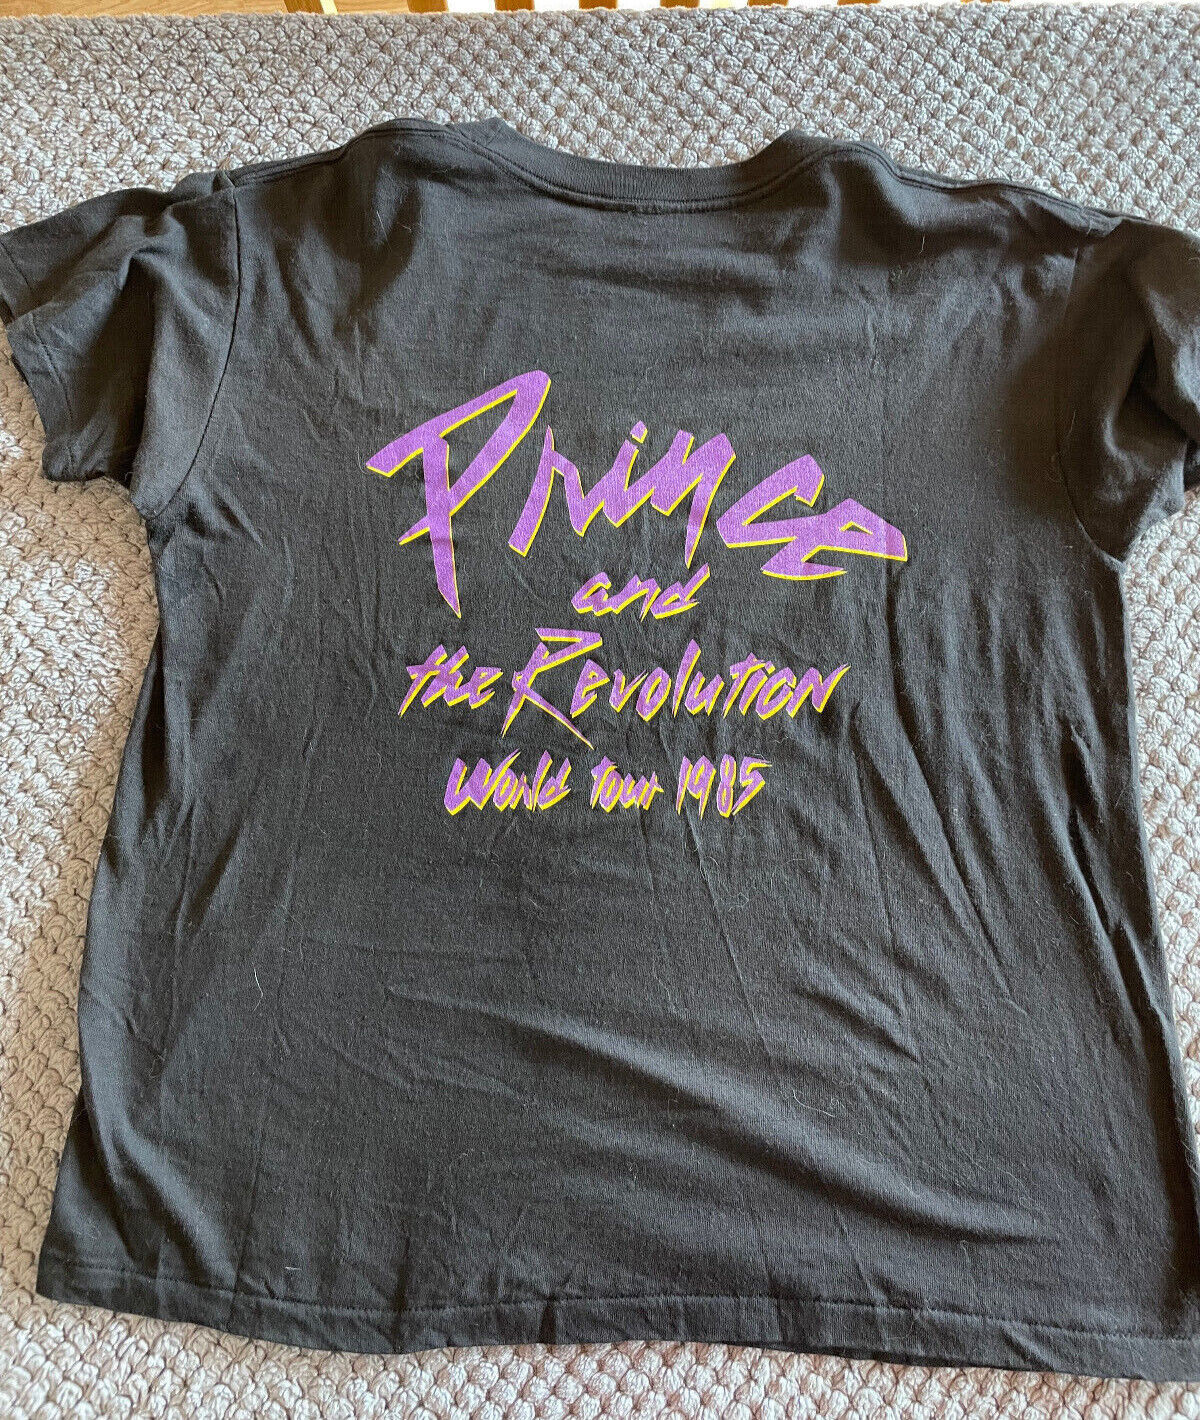 Prince and the Revolution VINTAGE 1985 shirt - never worn